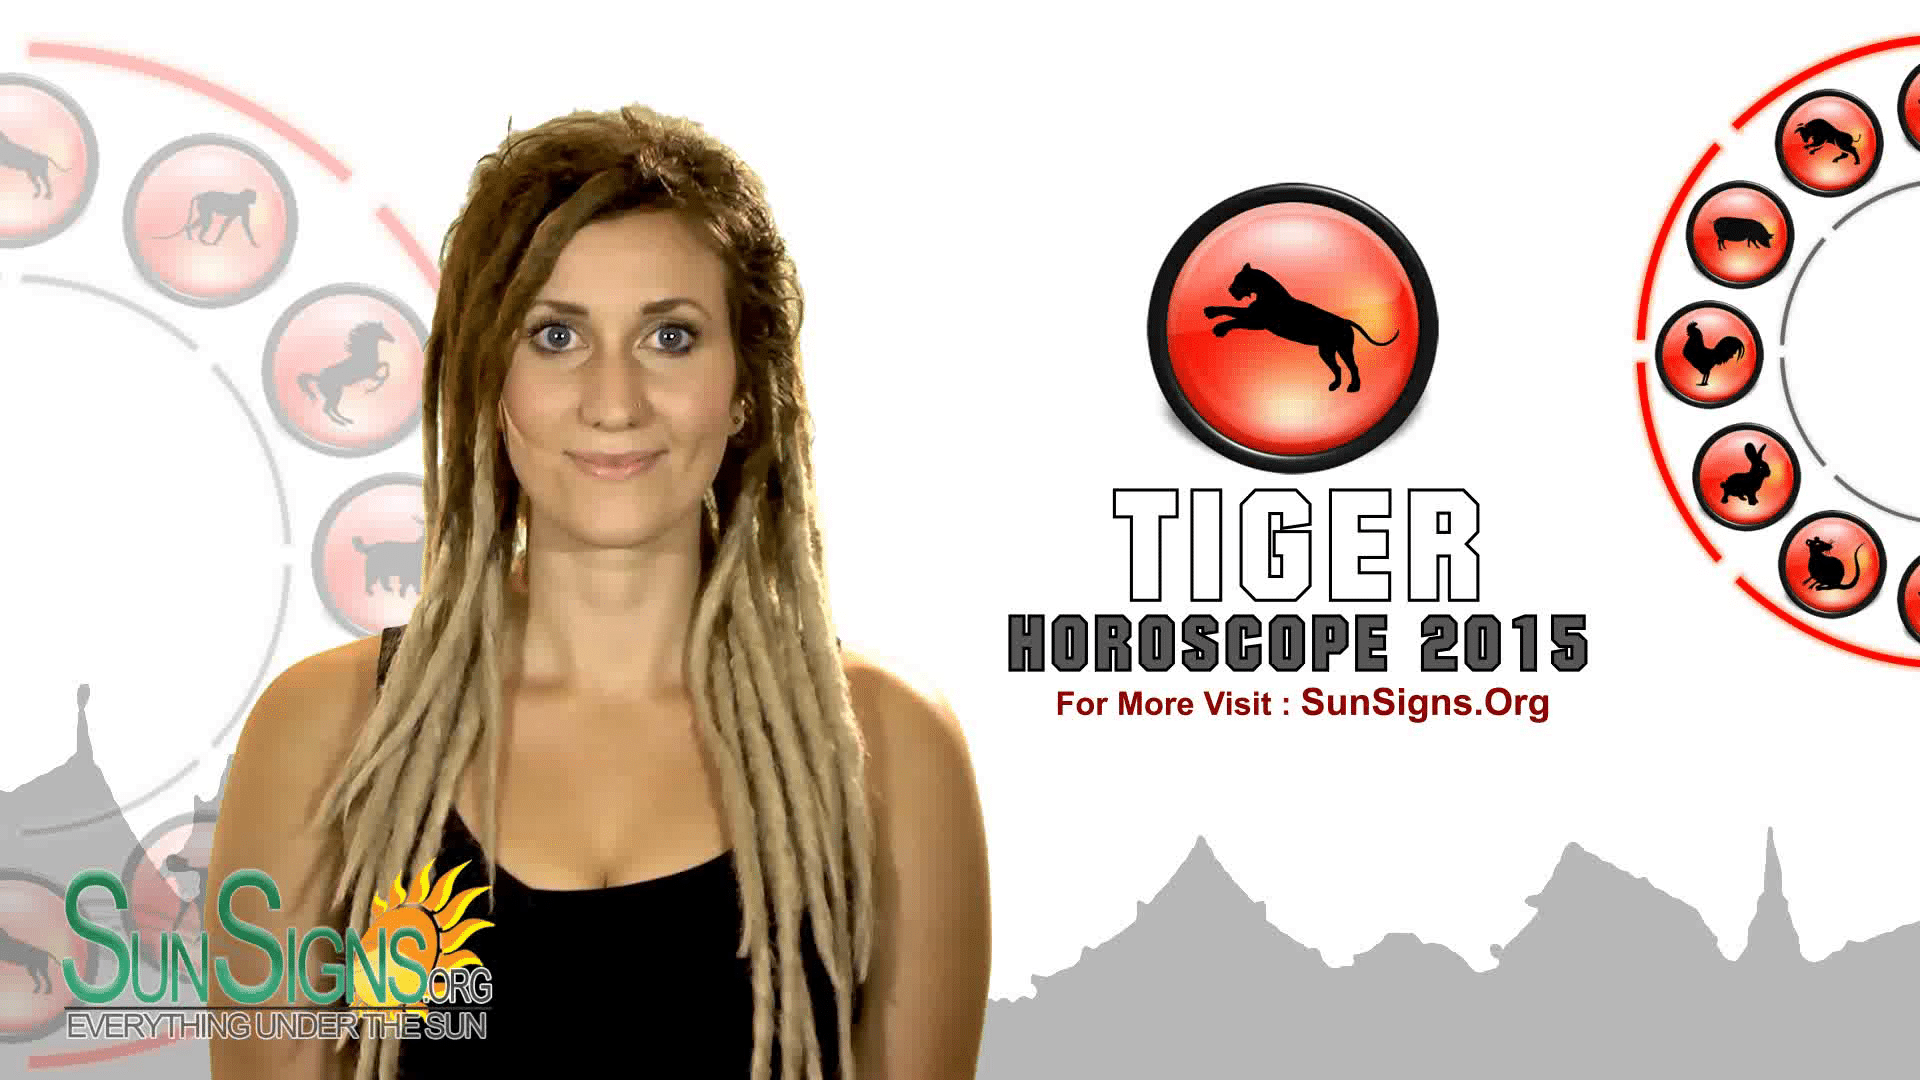 Tiger 2015 Horoscope | SunSigns.Org